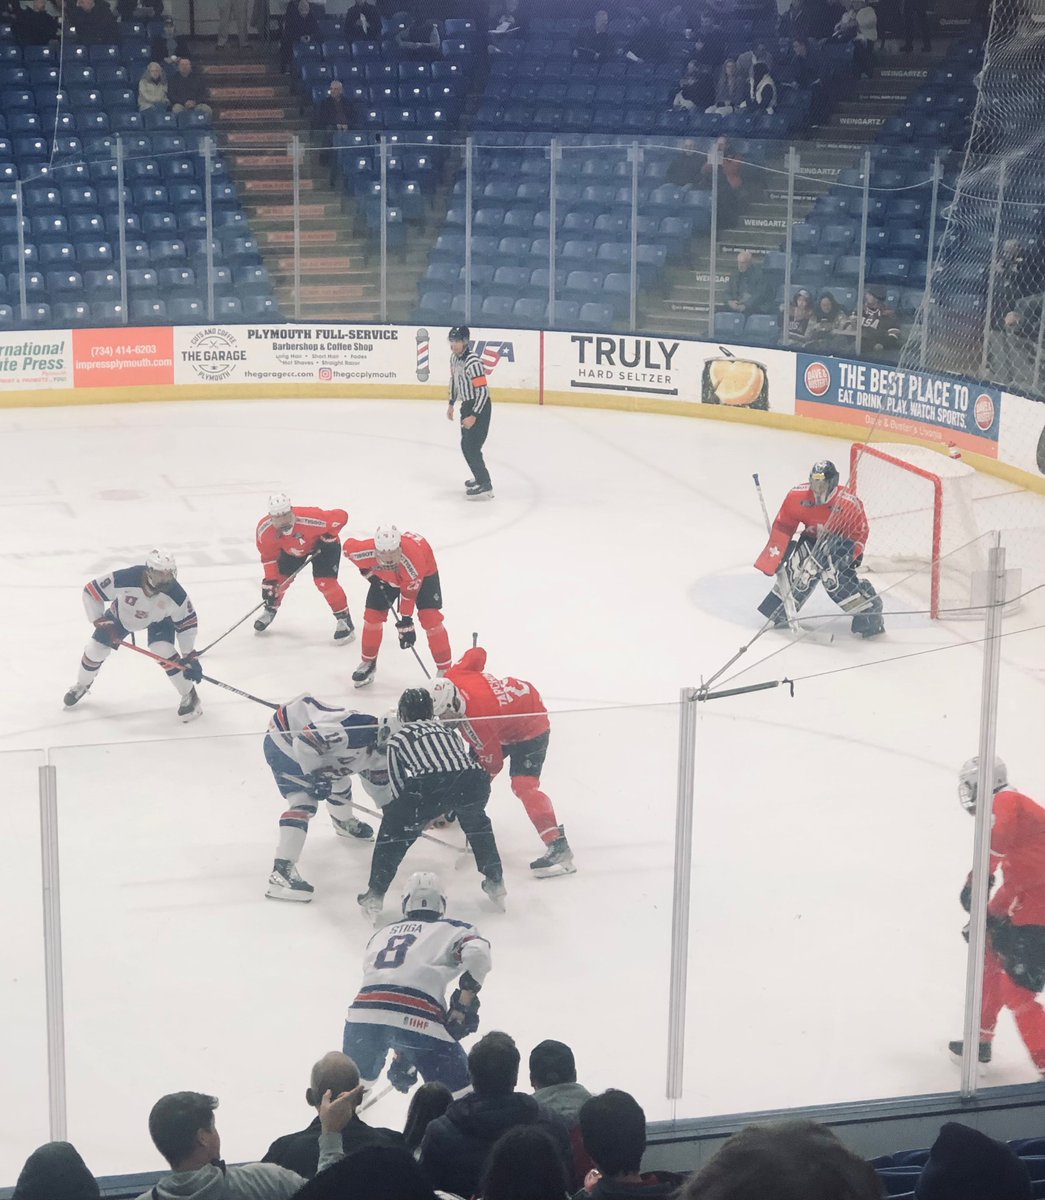 Some @USAHockeyNTDP action against SUI to kick off the #FiveNations this week! #NHLDraft